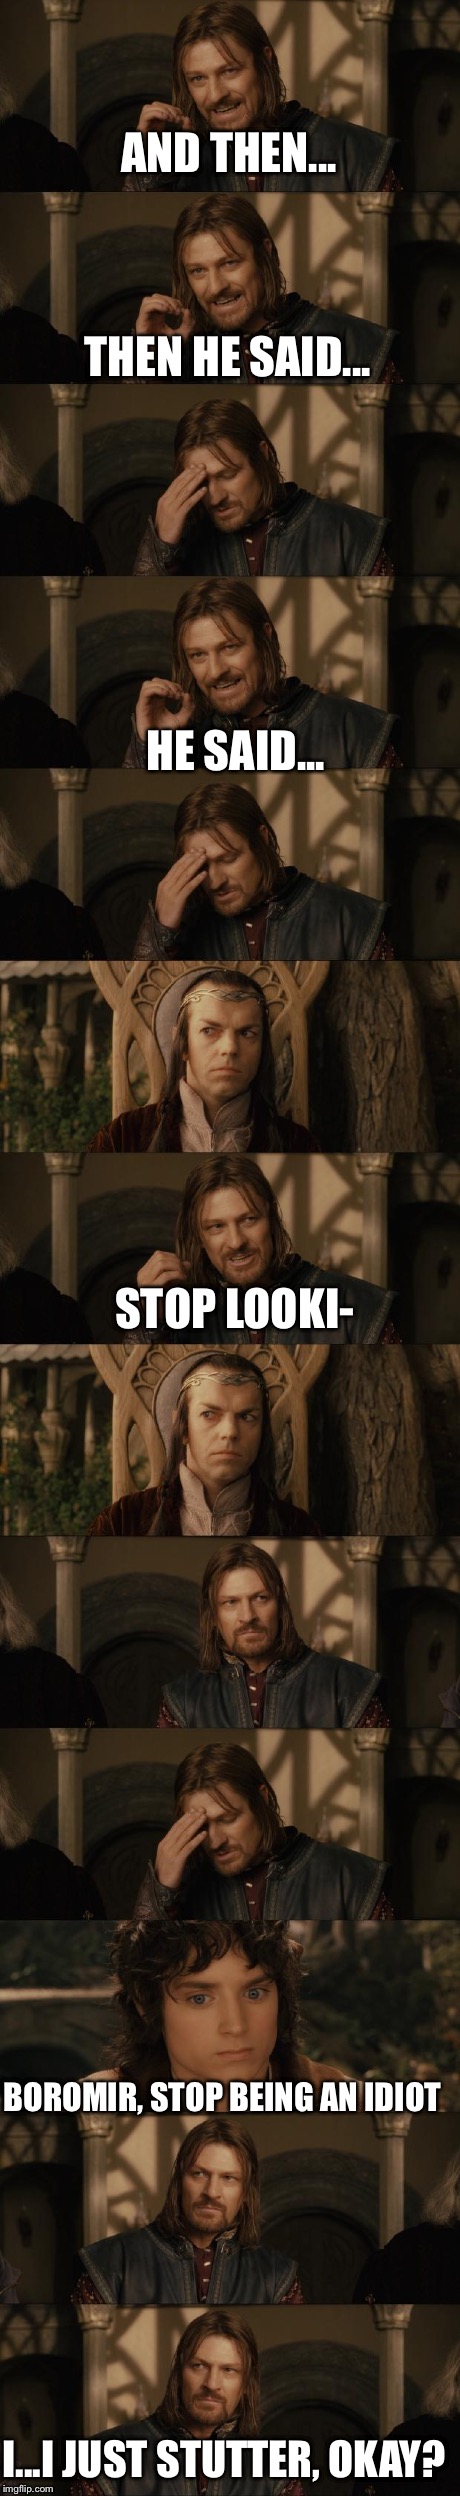 Boromir's Stutter | AND THEN... THEN HE SAID... HE SAID... STOP LOOKI- BOROMIR, STOP BEING AN IDIOT I...I JUST STUTTER, OKAY? | image tagged in one does not simply | made w/ Imgflip meme maker